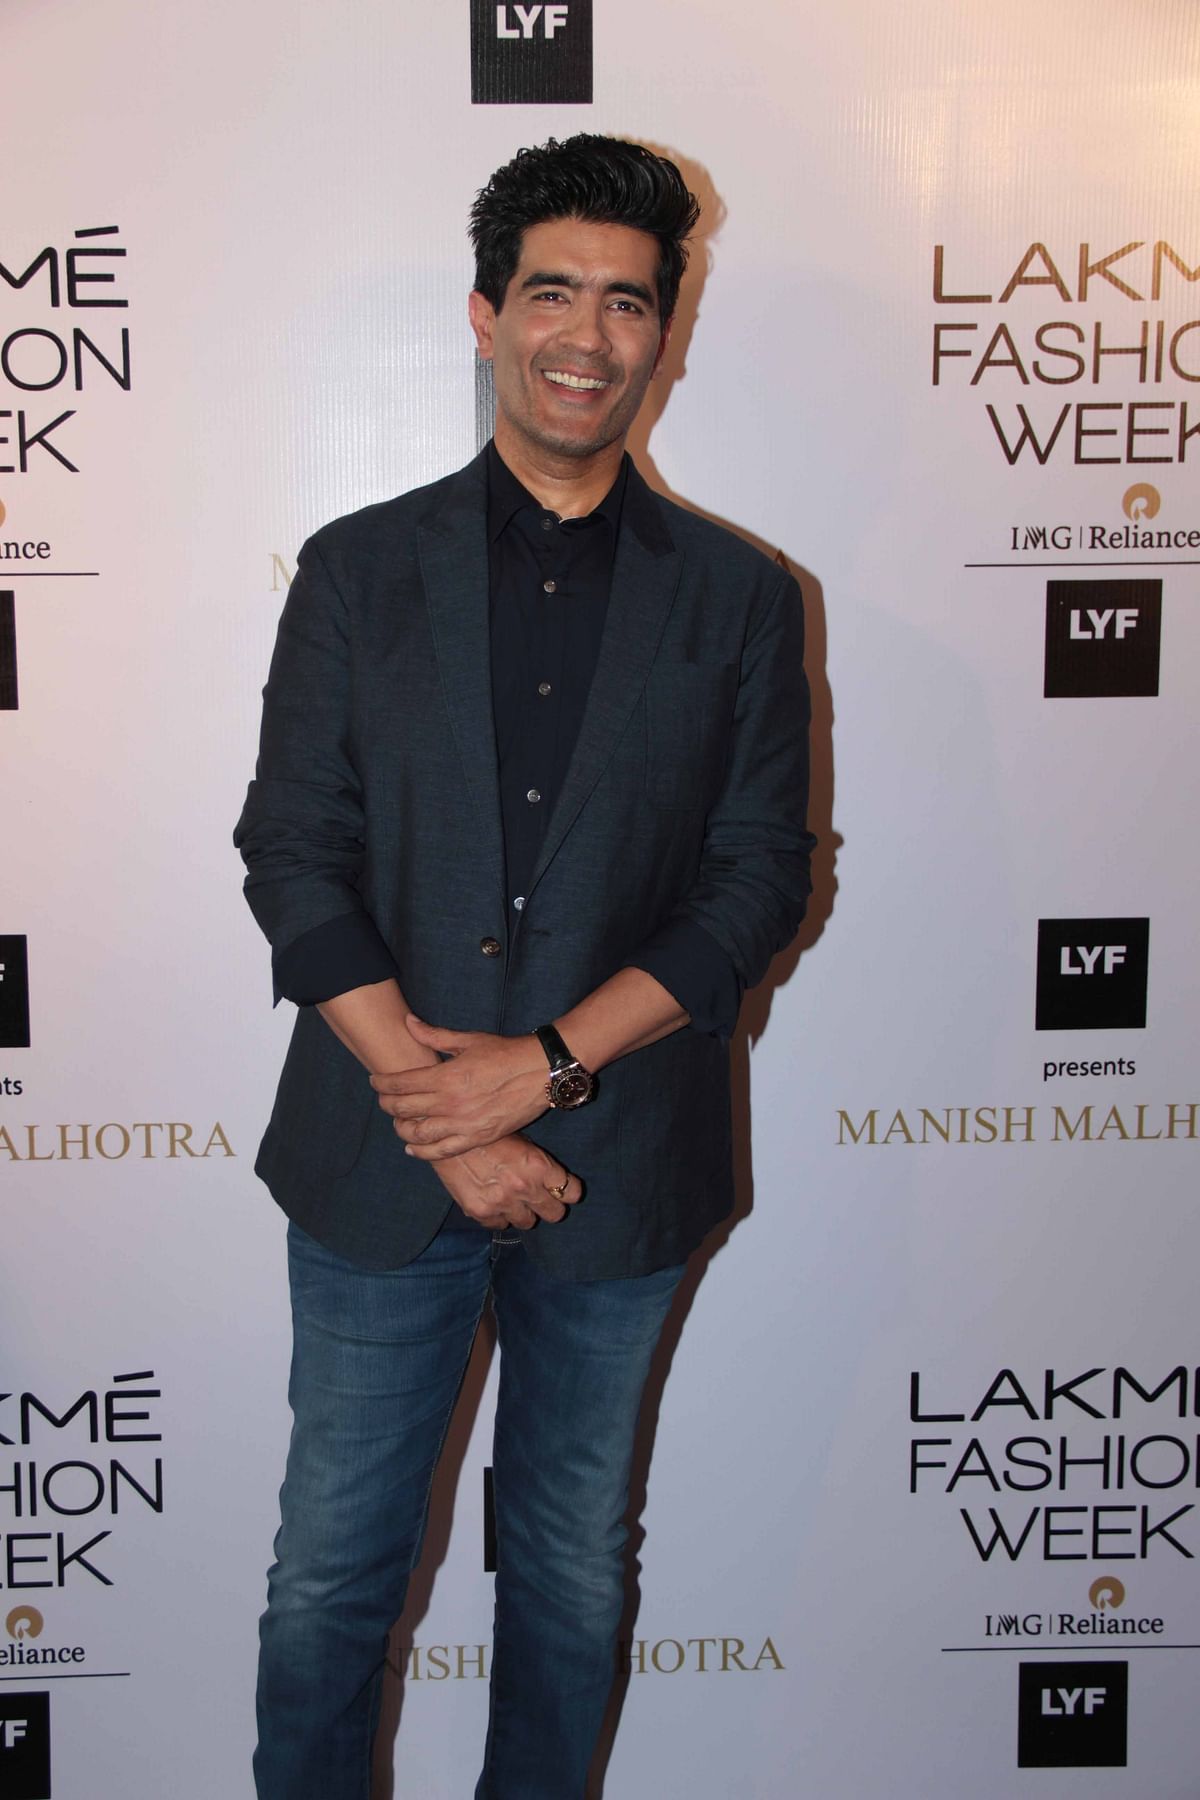 Lakmé Fashion Week 2016 is just around the corner and Manish Malhotra’s preview has got our hopes up really high. 